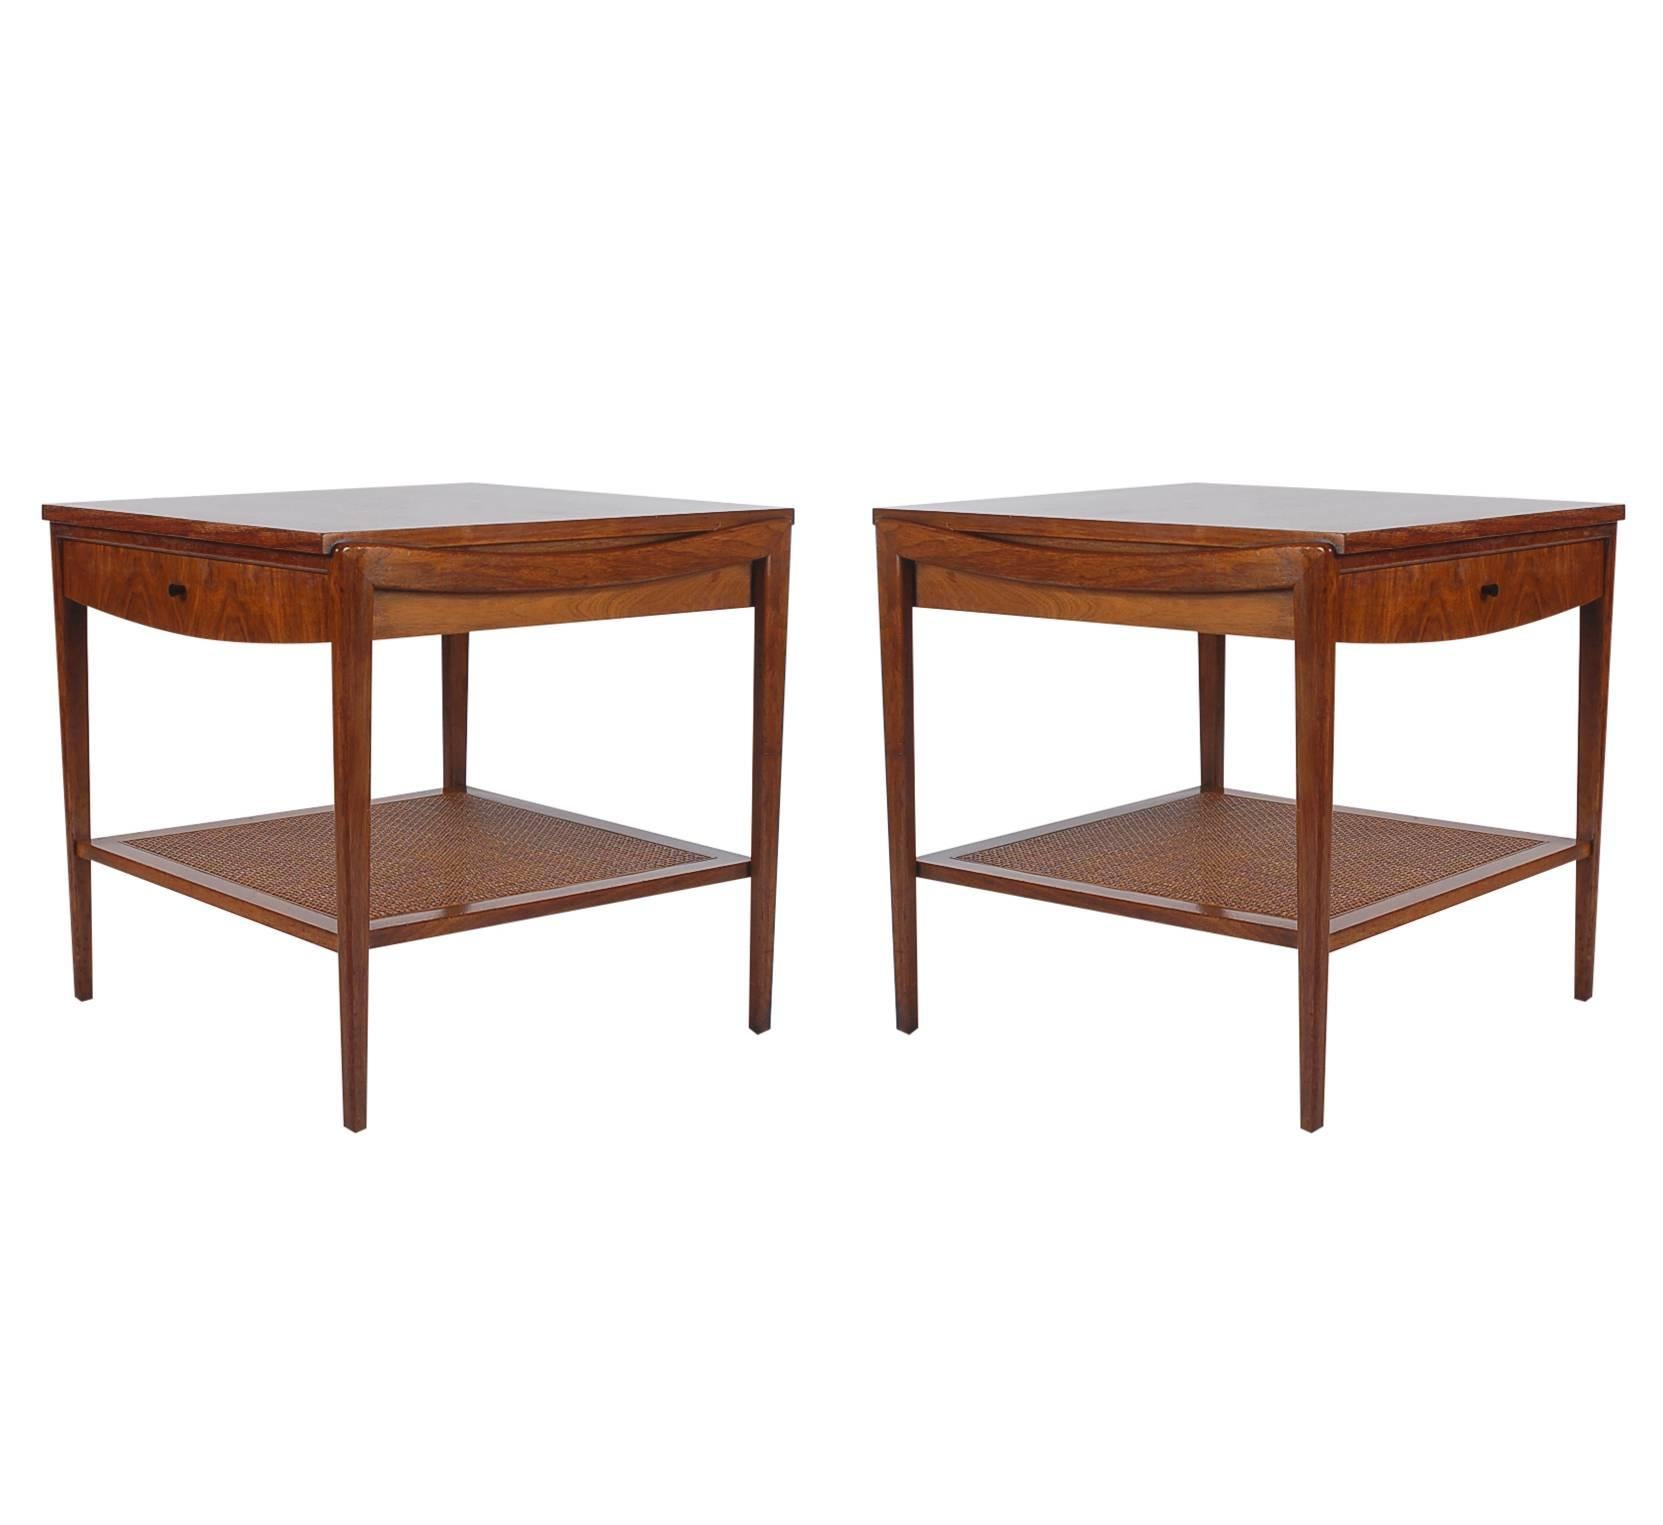 A very simple and handsome designed pair of tables or nightstands produced by John Widdicomb in the 1960s. They feature beautiful walnut construction, single drawers, and a lower tier caned shelf.

In the style of: Ico Parisi, Gio Ponti, Edward